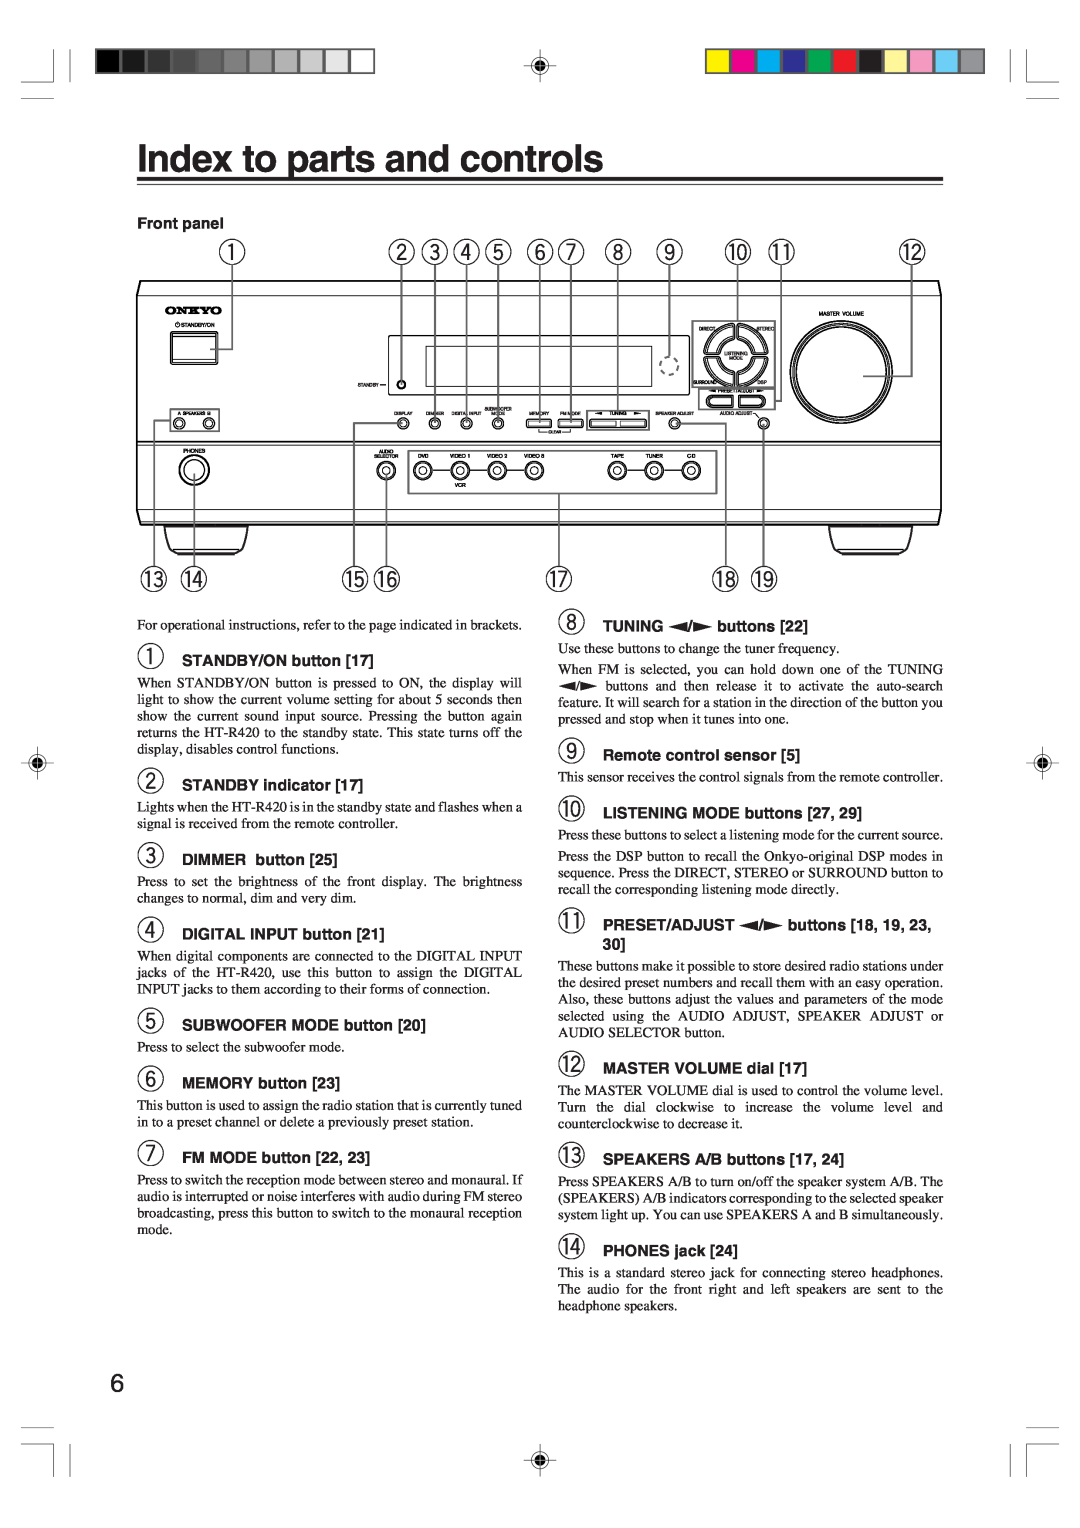 Onkyo HT-R420 appendix Index to parts and controls, 2 3 4, ~ ! @ #, $% 